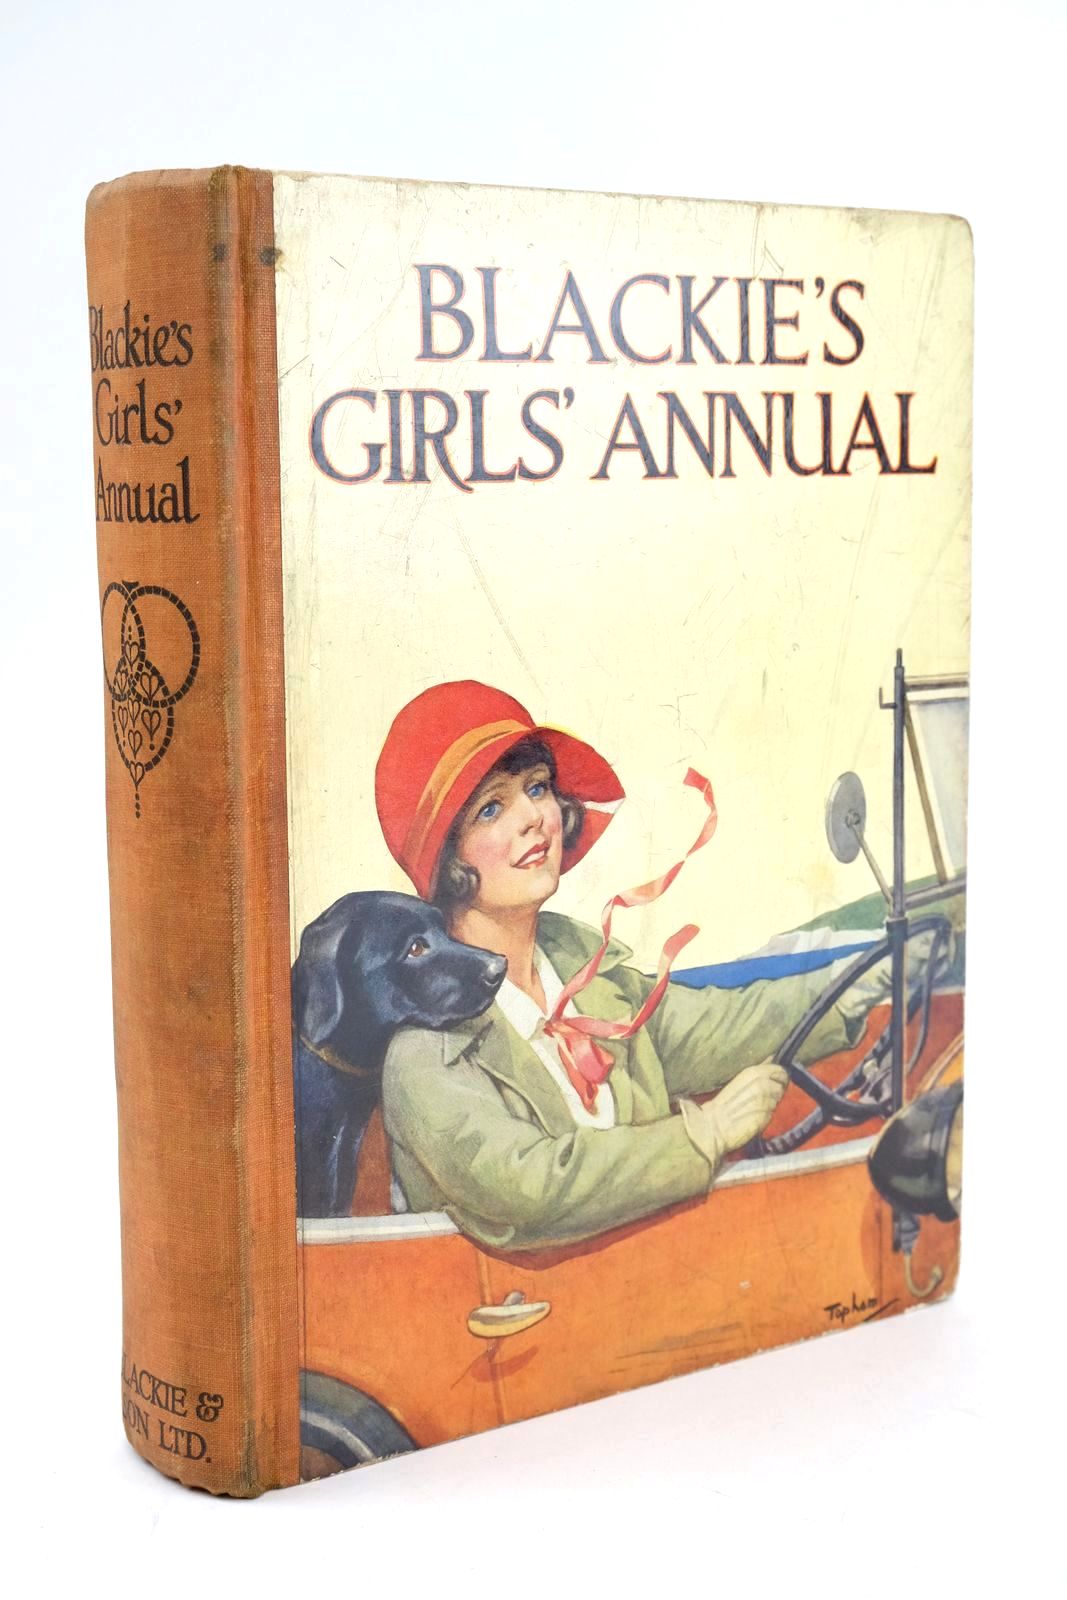 Photo of BLACKIE'S GIRLS' ANNUAL written by Joan, Natalie Rutley, C. Bernard Methley, Violet M. Talbot, Ethel Buckingham, M.E. Cobb, Ruth et al, illustrated by Watson, A.H. Bestall, Alfred Brock, C.E. Cobb, Ruth Aris, Ernest A. Topham, Inez et al., published by Blackie &amp; Son Ltd. (STOCK CODE: 1324980)  for sale by Stella & Rose's Books